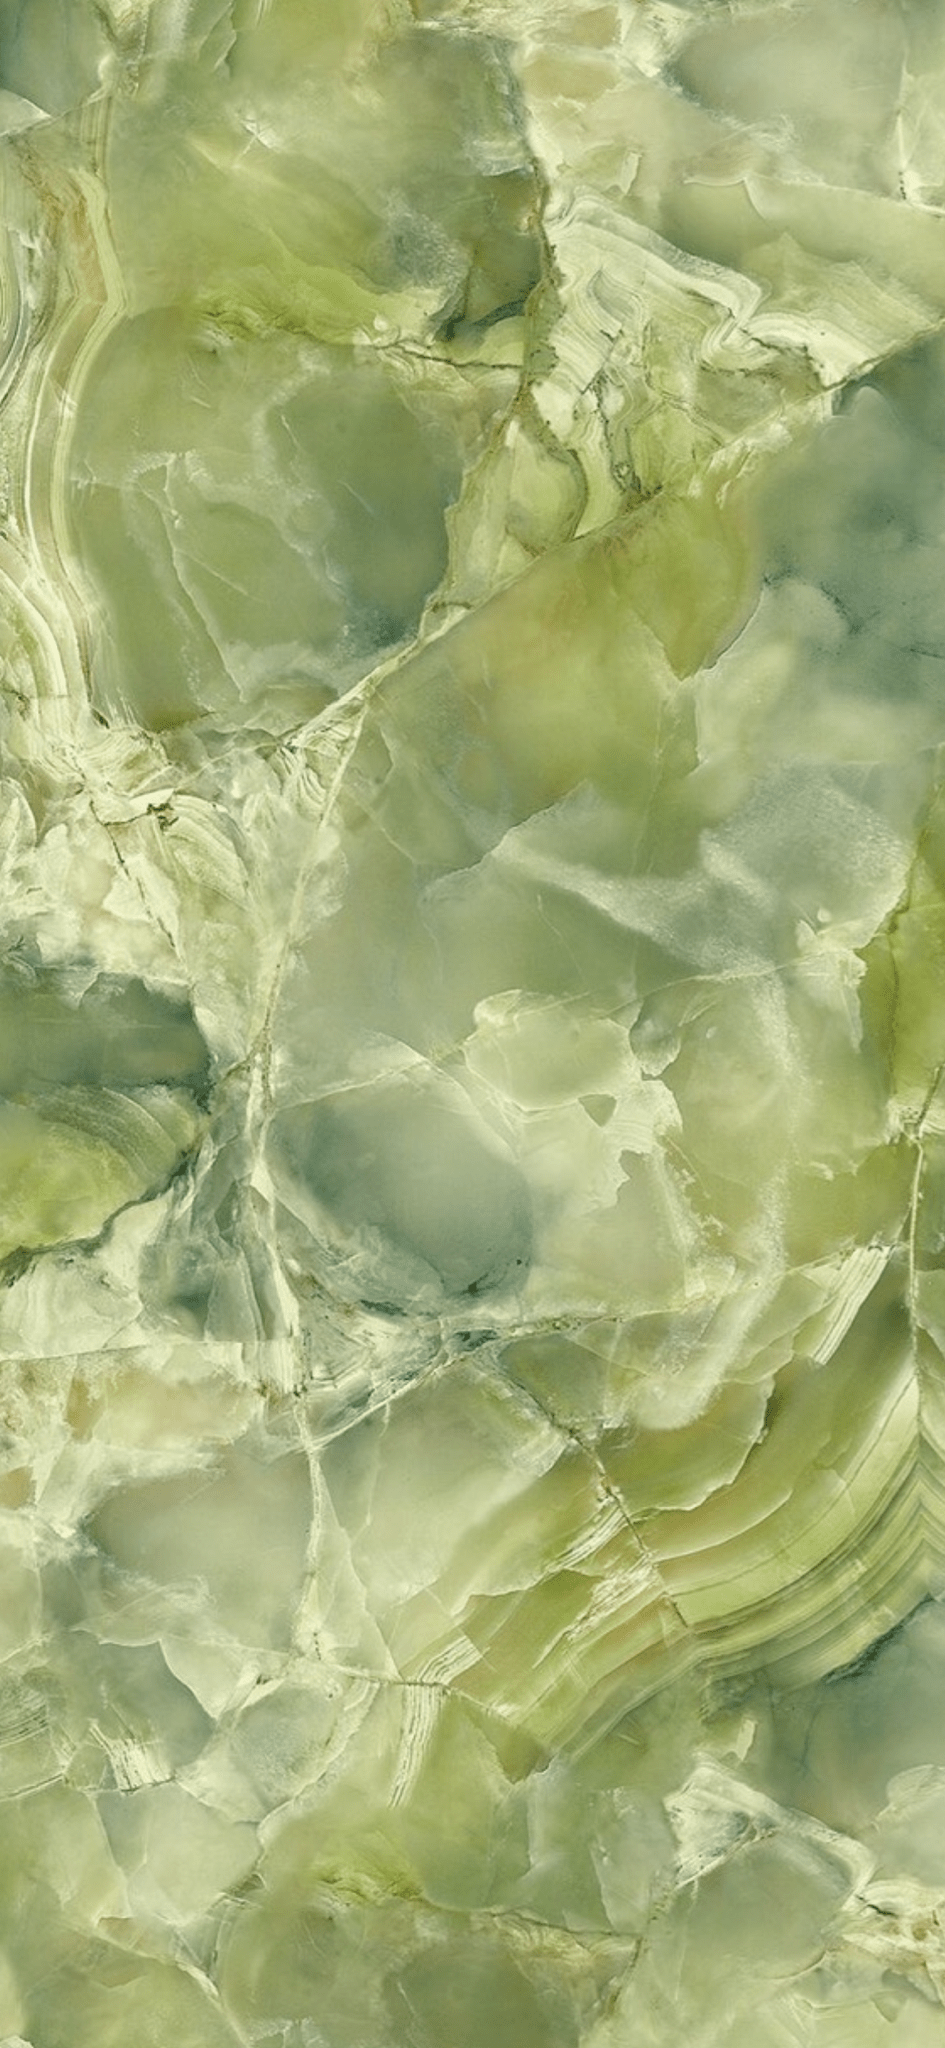 A green marble background with white and grey veining. - Sage green